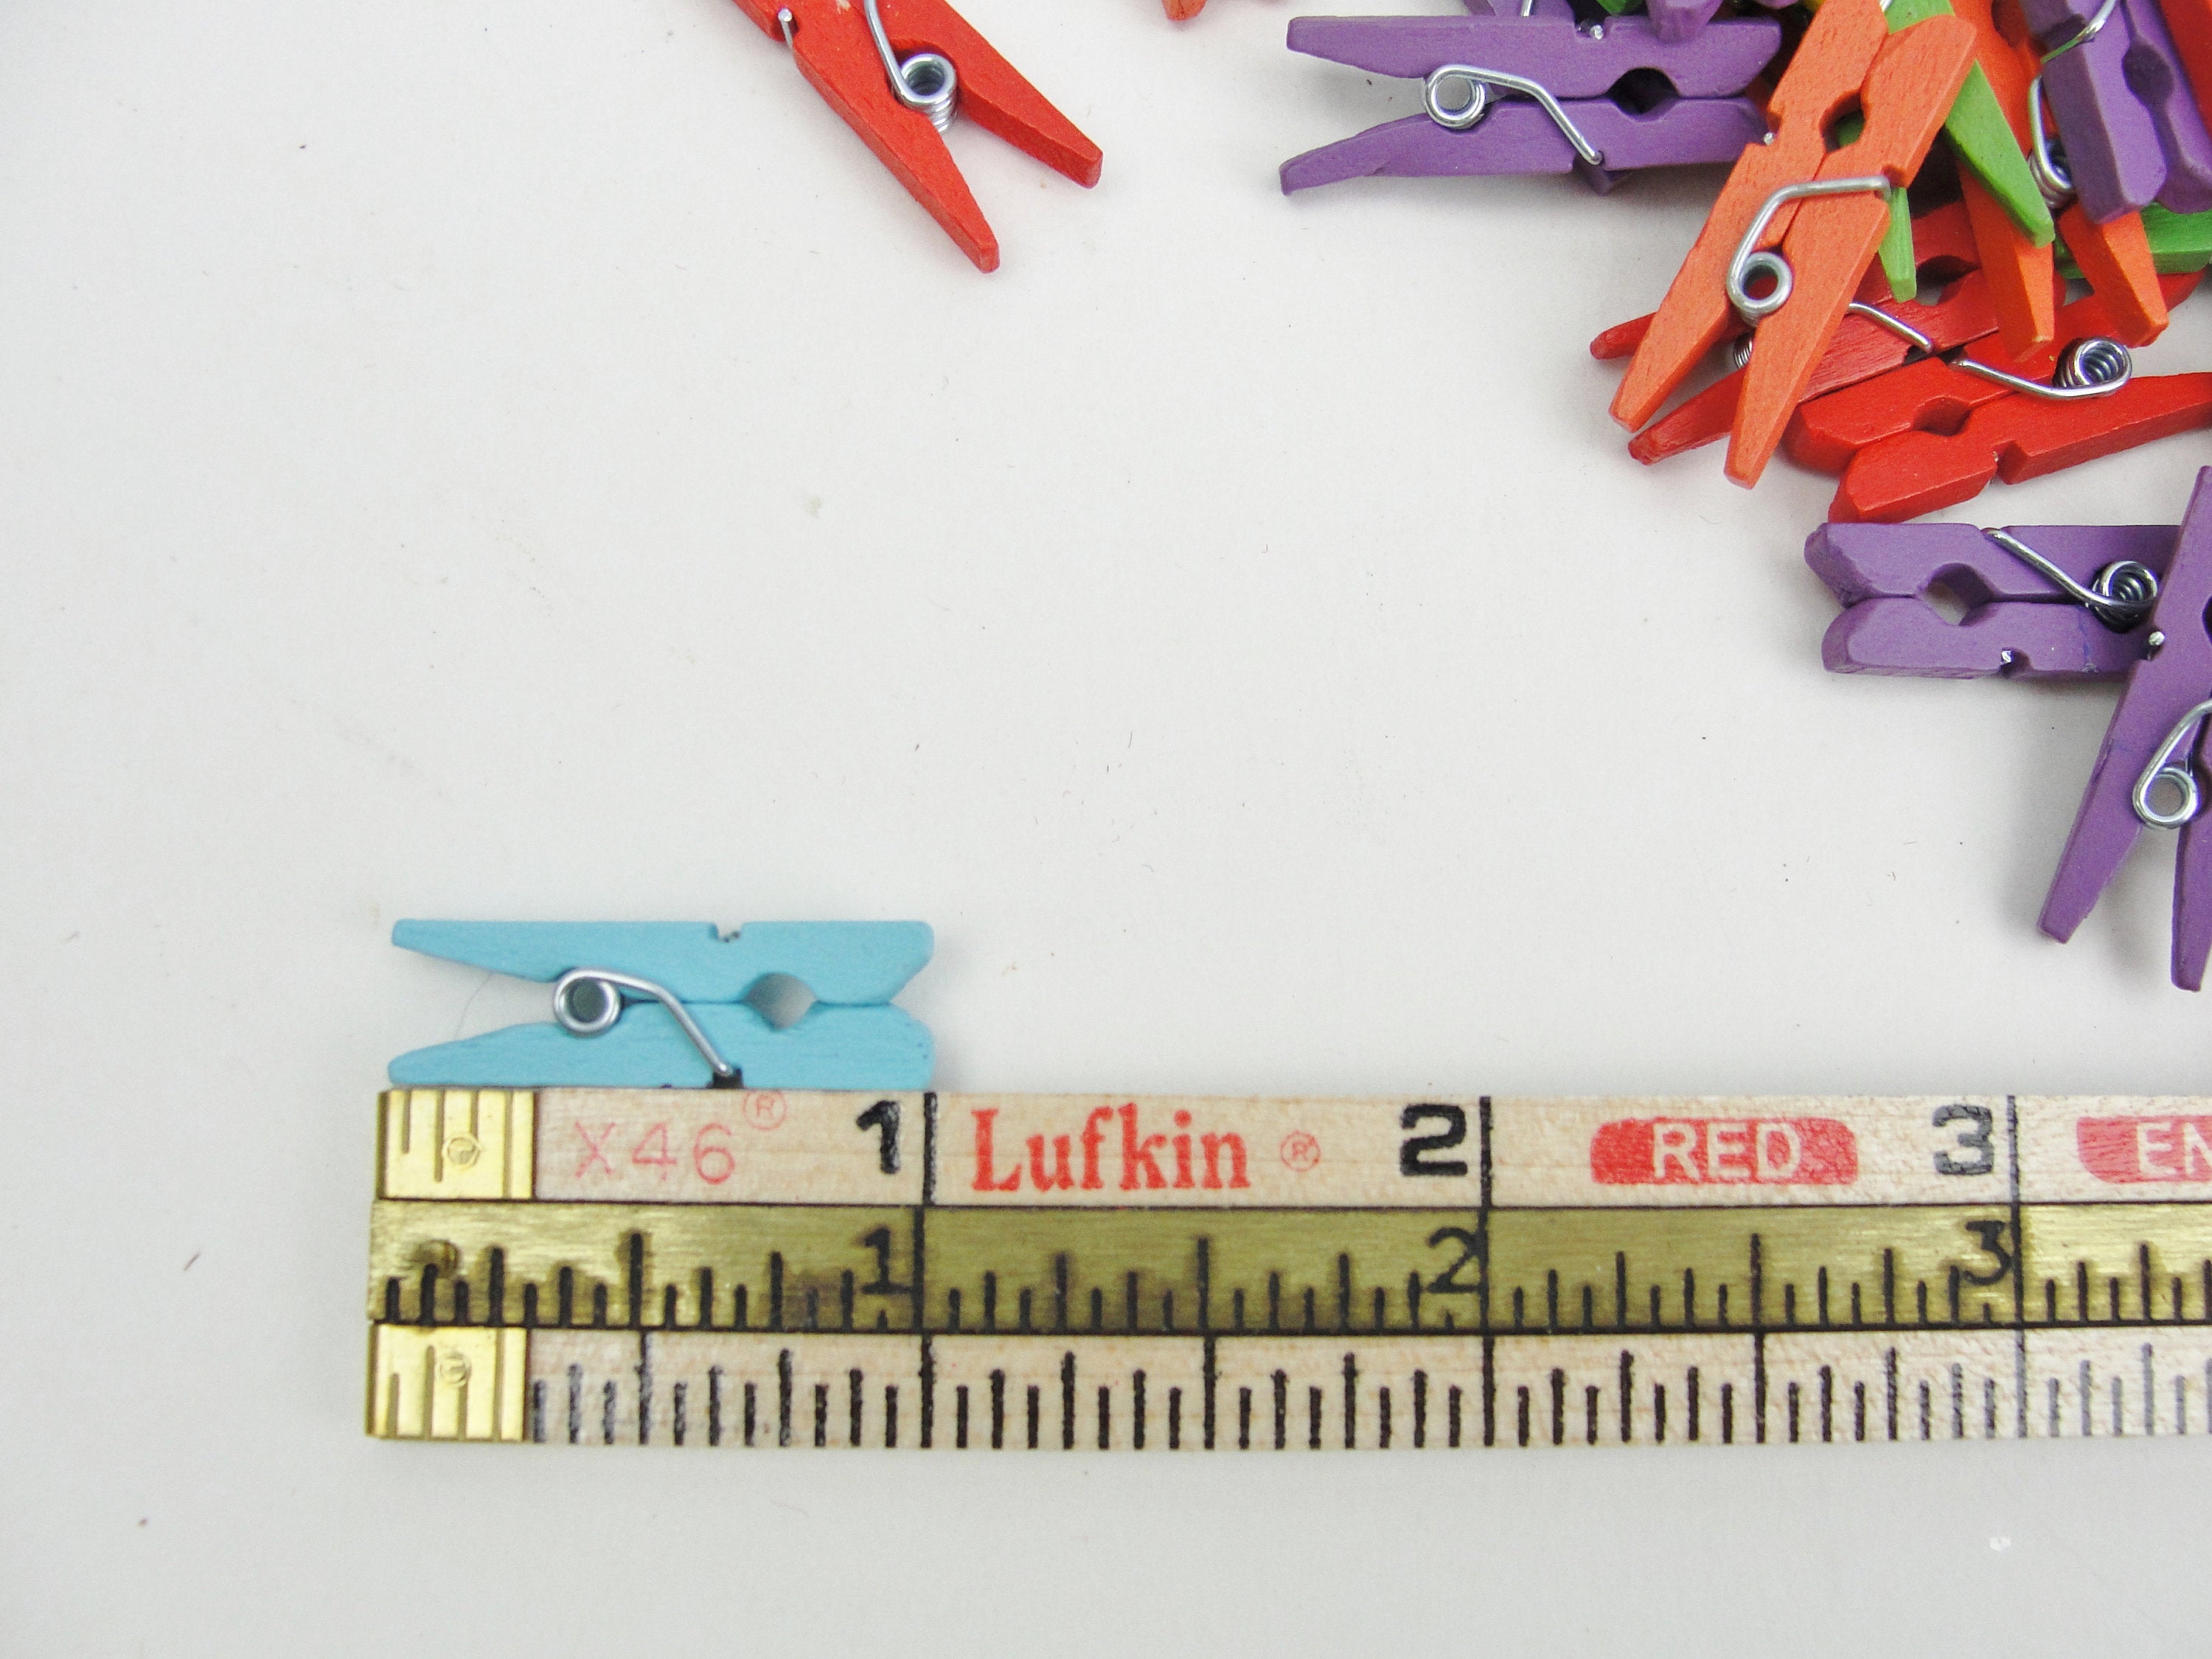 Tiny clothespins, 1 miniature clothespins choose your color